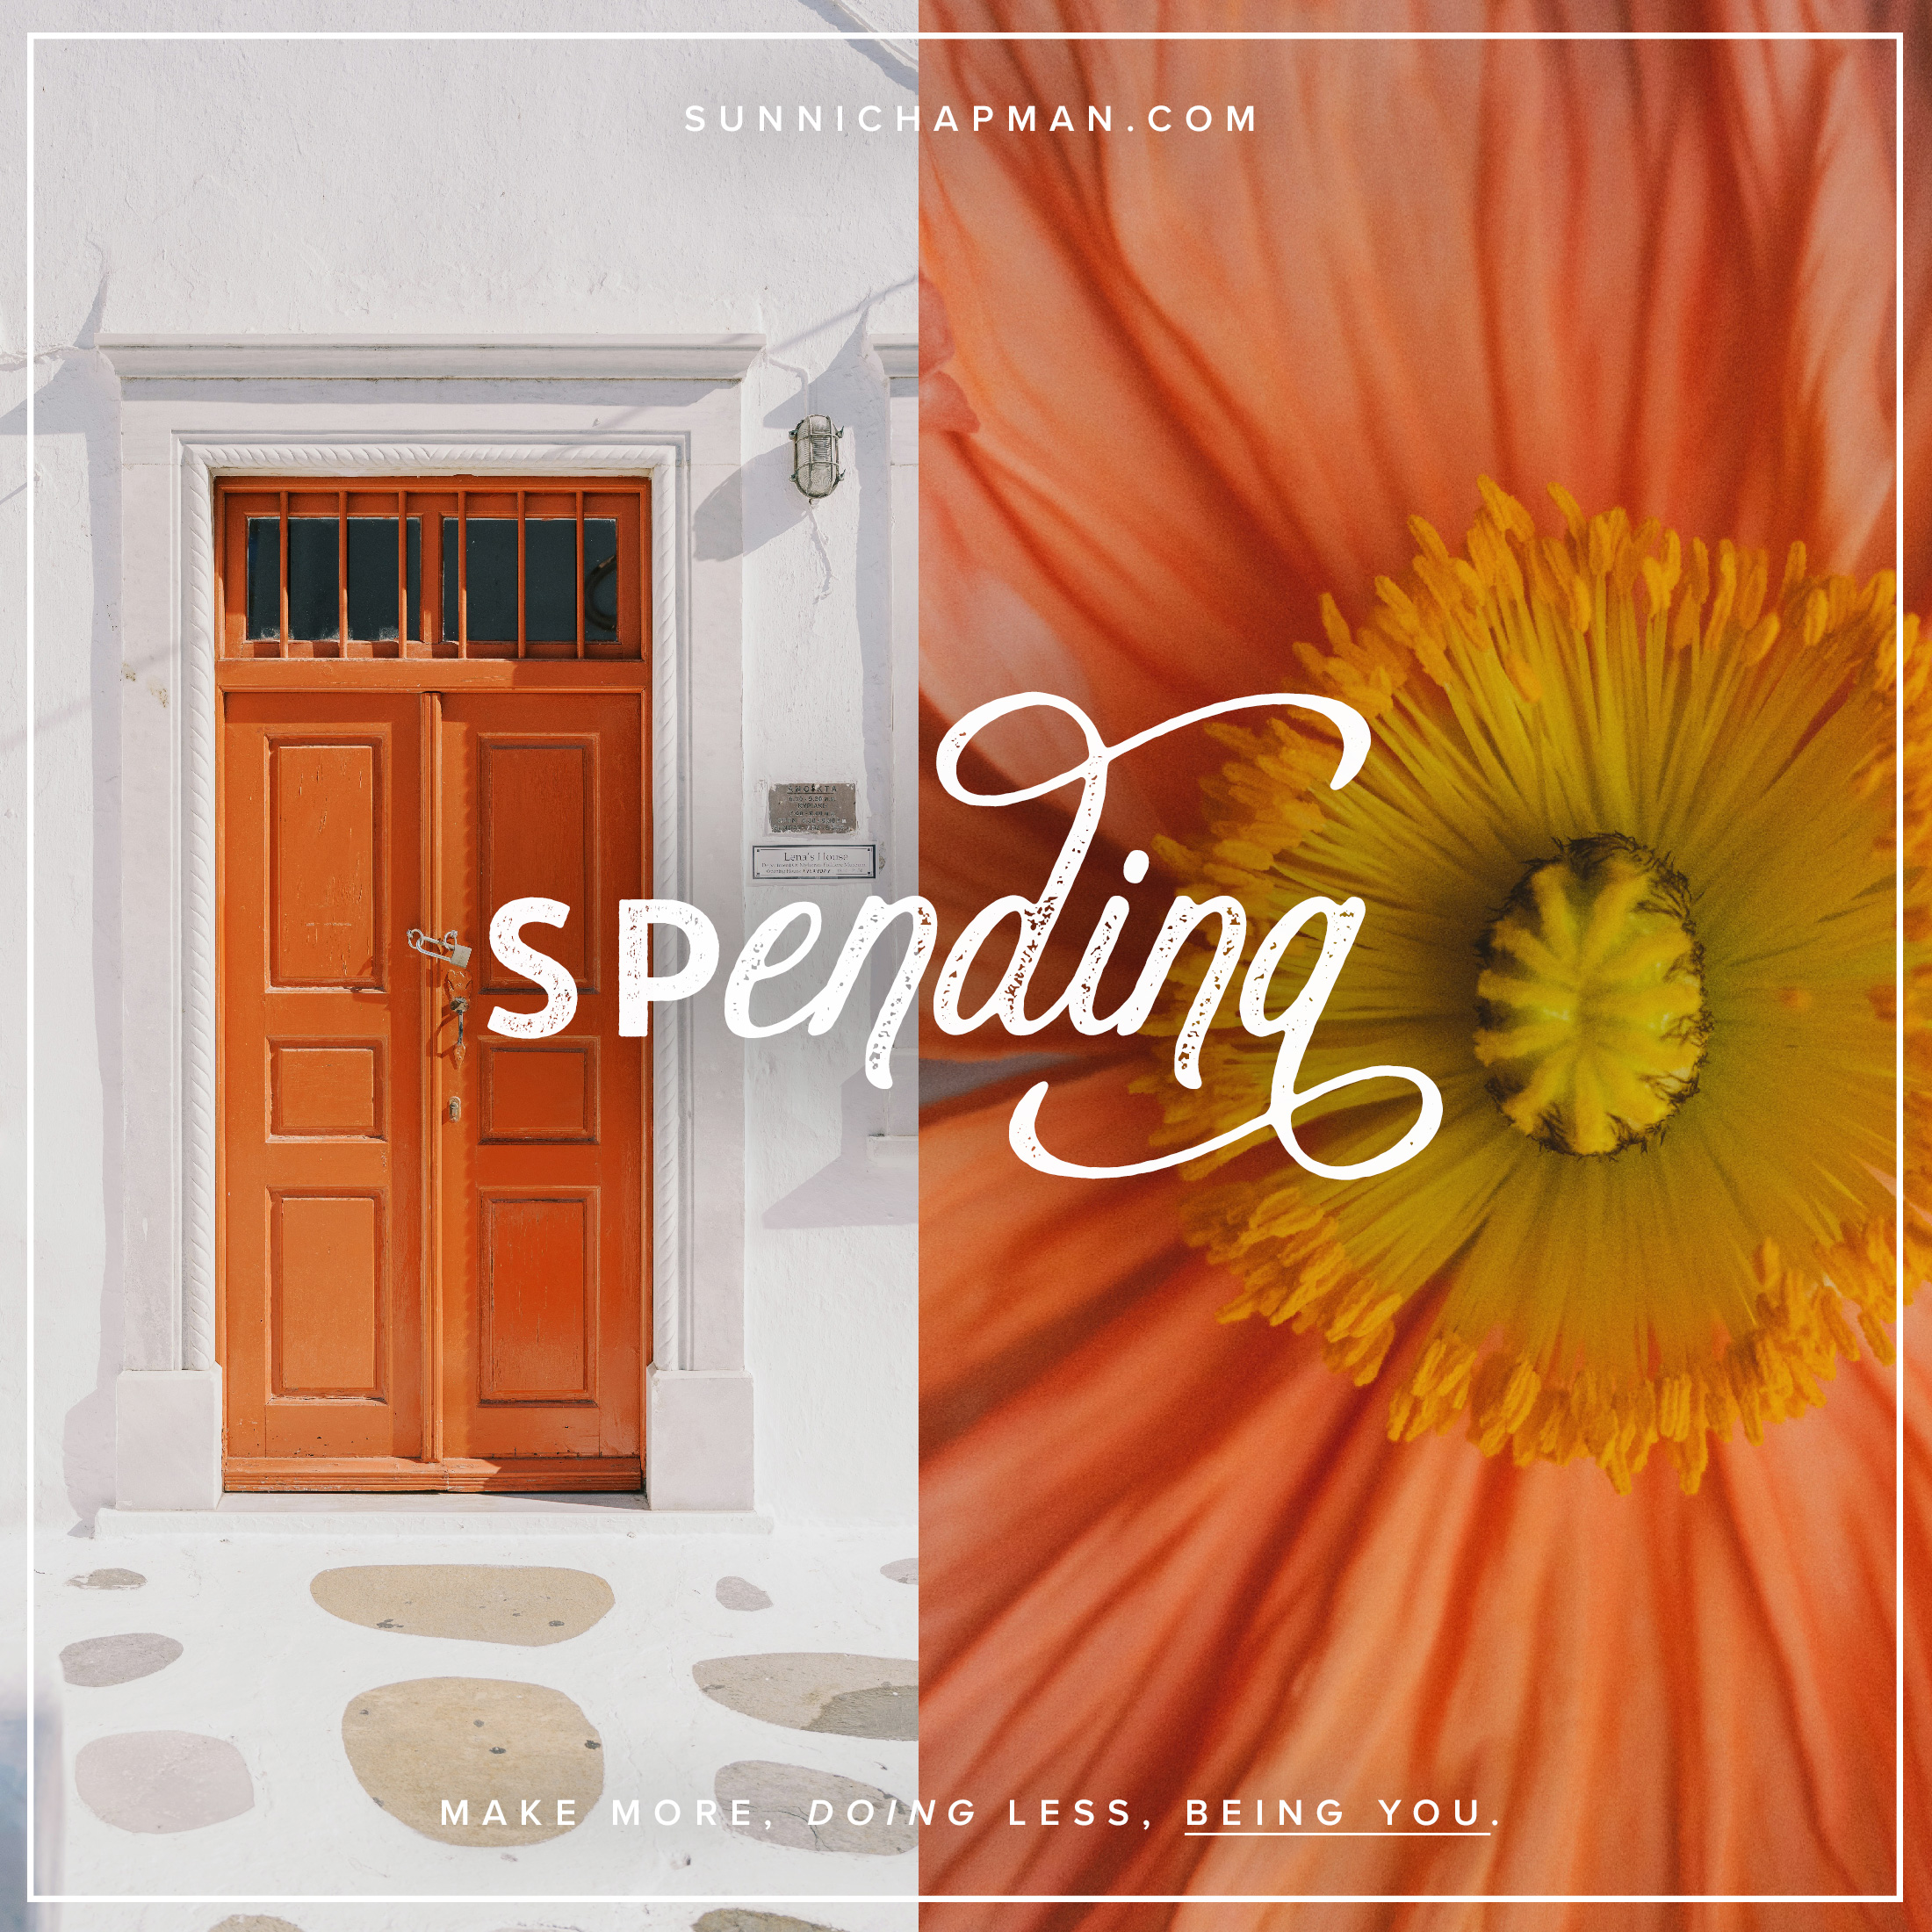 
The image is a square graphic with two distinct halves. On the left side, there's a white building with a bright orange door that has rectangular panels and a small rectangular window at the top. There's a silver wall-mounted mailbox and a small light fixture beside the door. The right half of the image shows a close-up of an orange flower with a bright yellow center, and the petals have a gradient from dark orange to light. Overlapping both halves, the word "Spending" is written in large, cursive, white text. In the top left corner, the URL "sunnichapman.com" is displayed in smaller white text, and in the lower half of the image, the phrase "MAKE MORE, DOING LESS, BEING YOU." is also written in smaller white text.